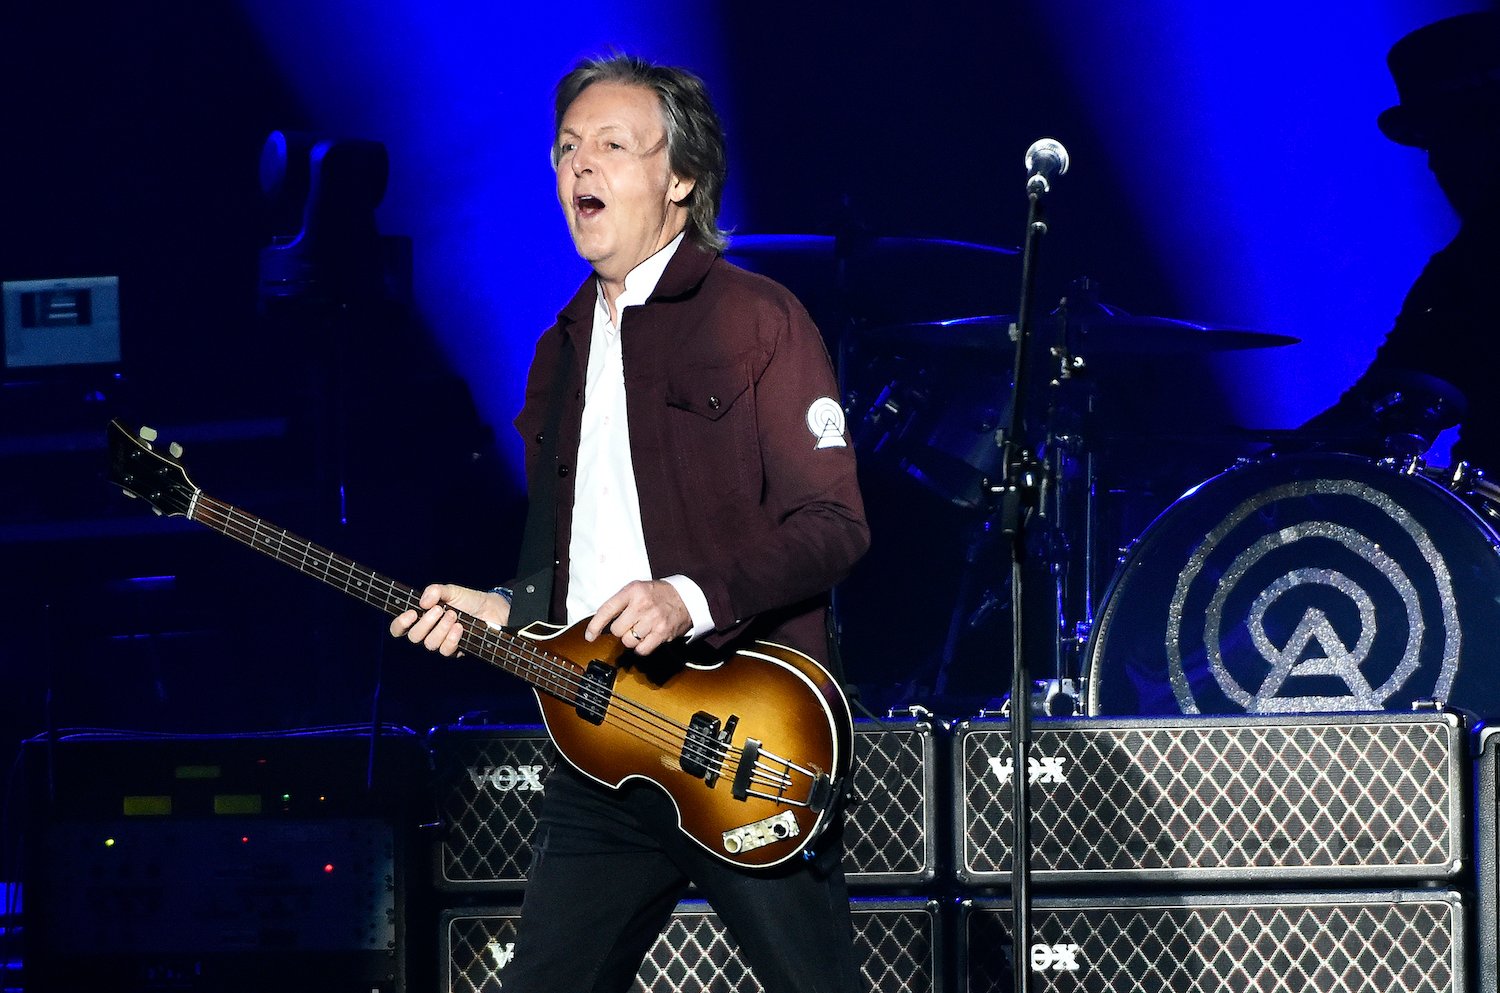 Paul McCartney performs during the 2018 Austin City Limits Music Festival in Austin, Texas